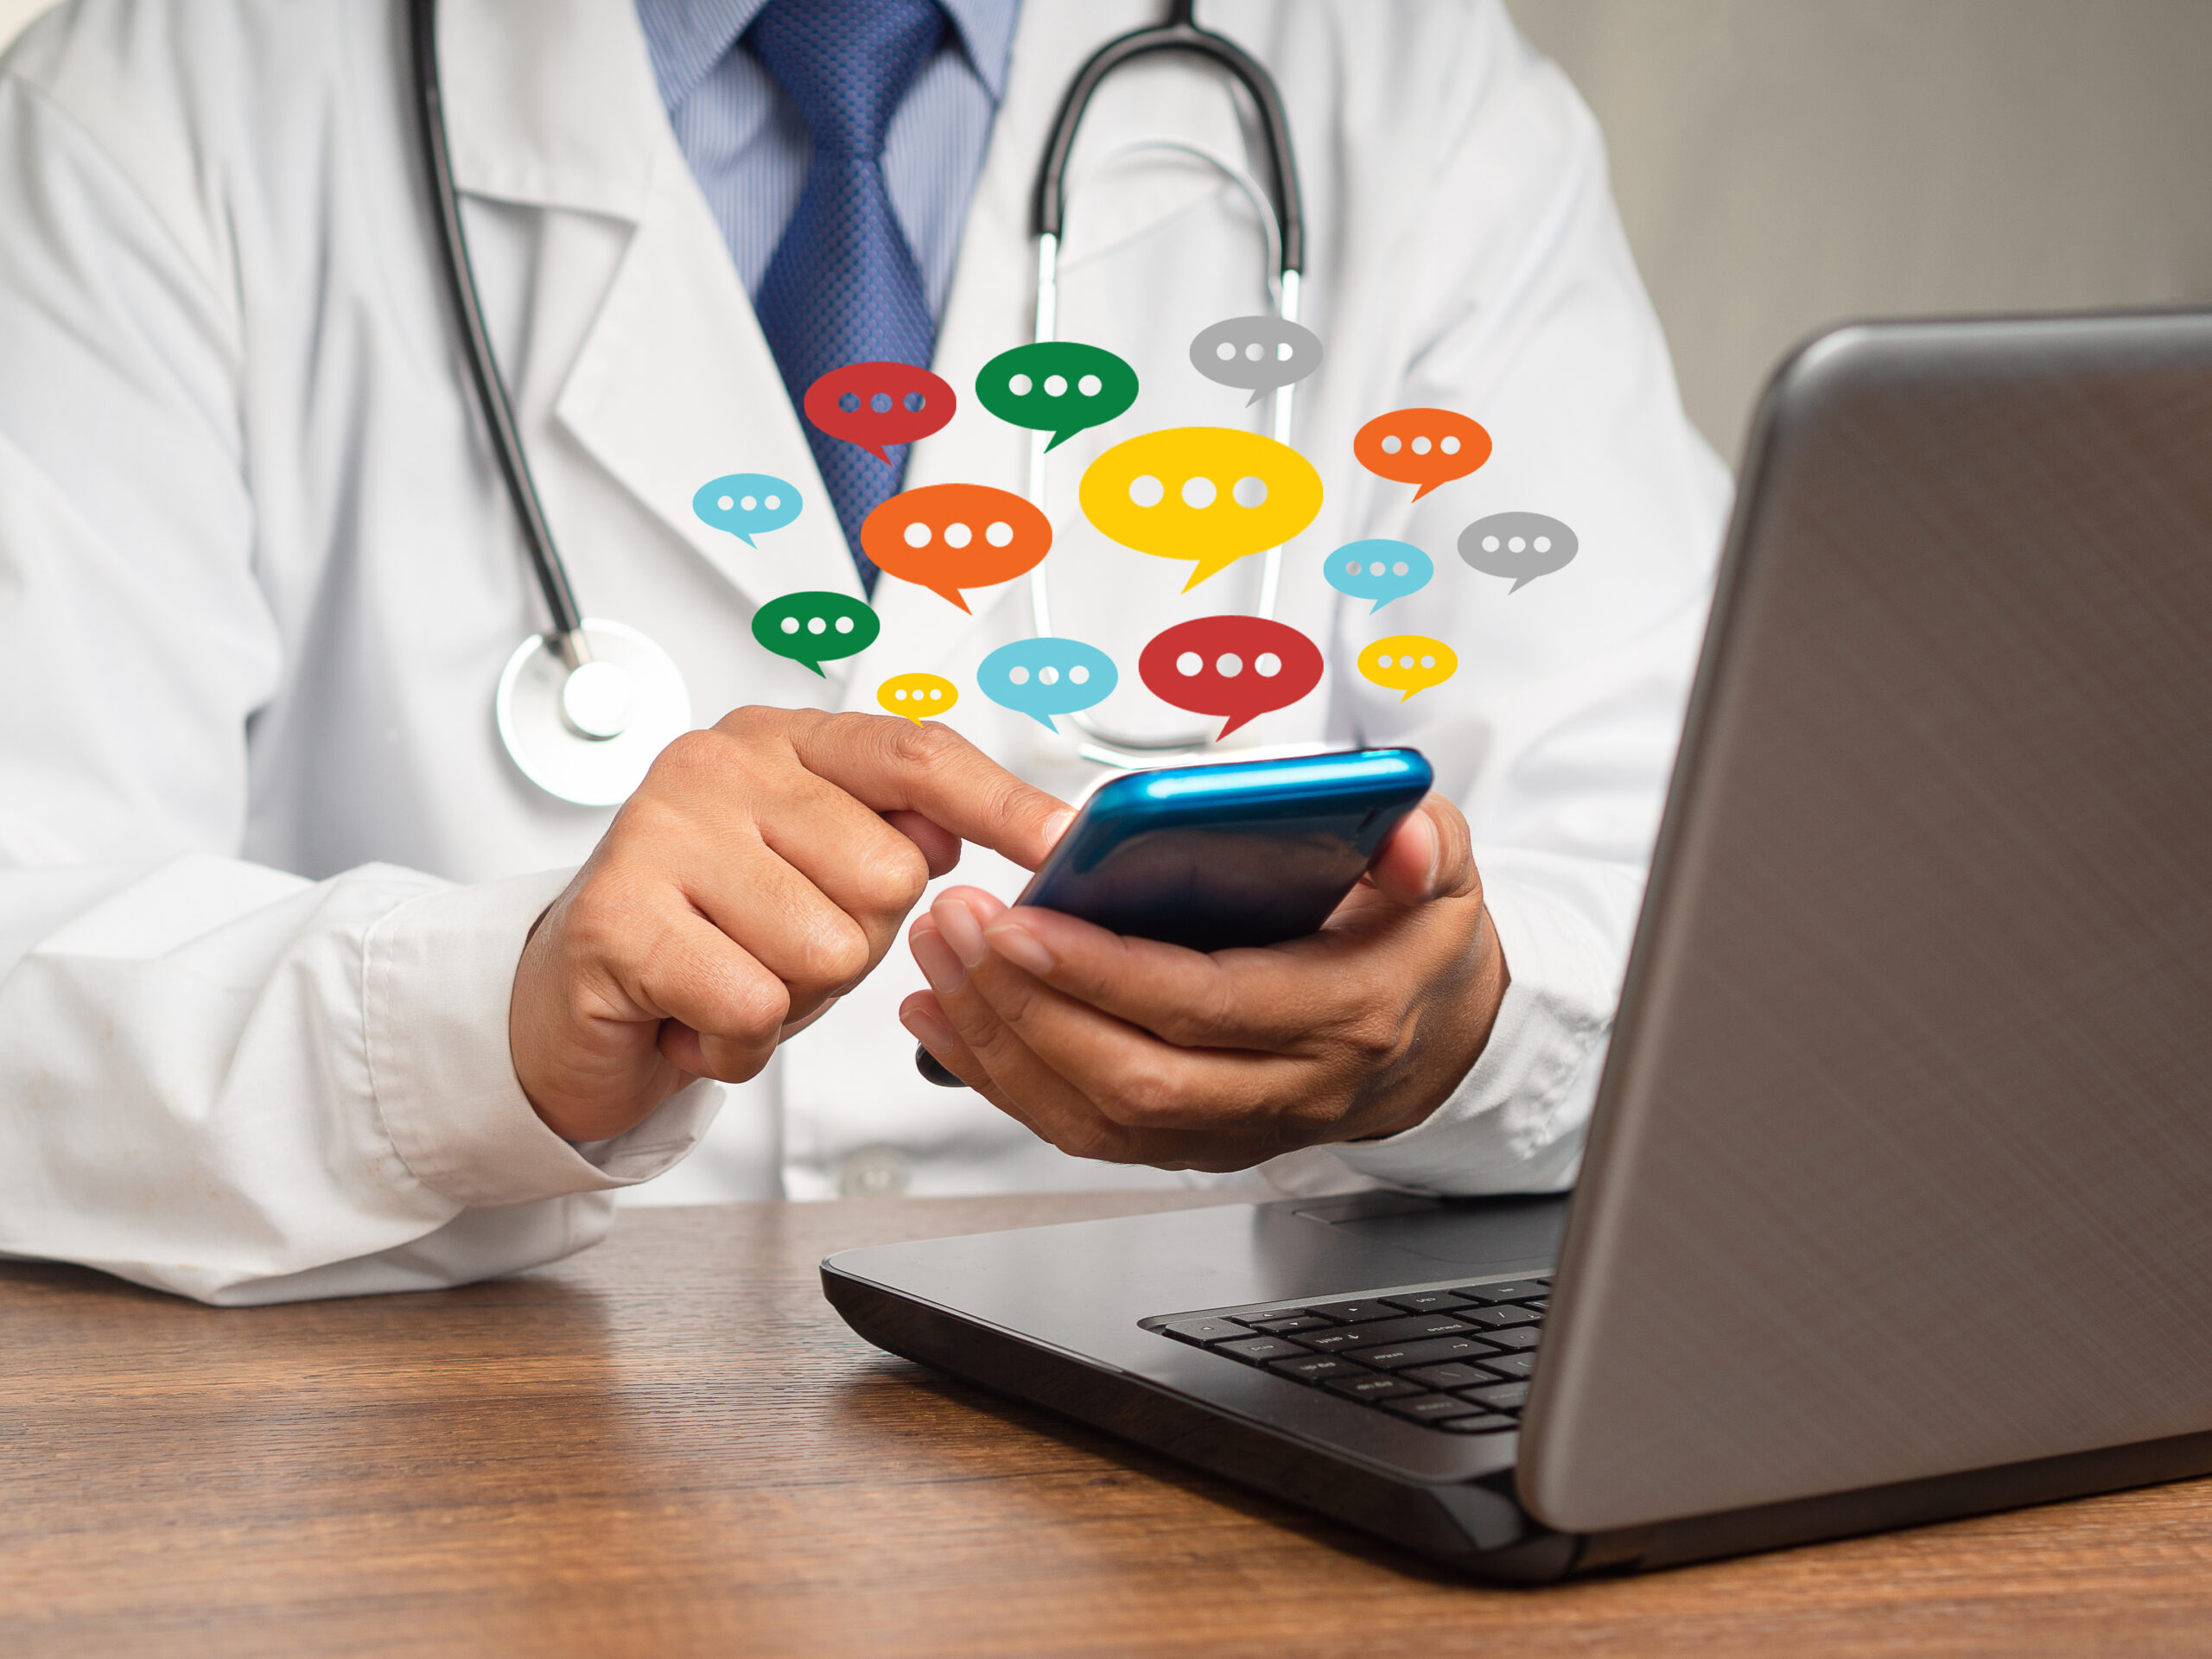 Doctor in a uniform using a smartphone with colorful chat icons